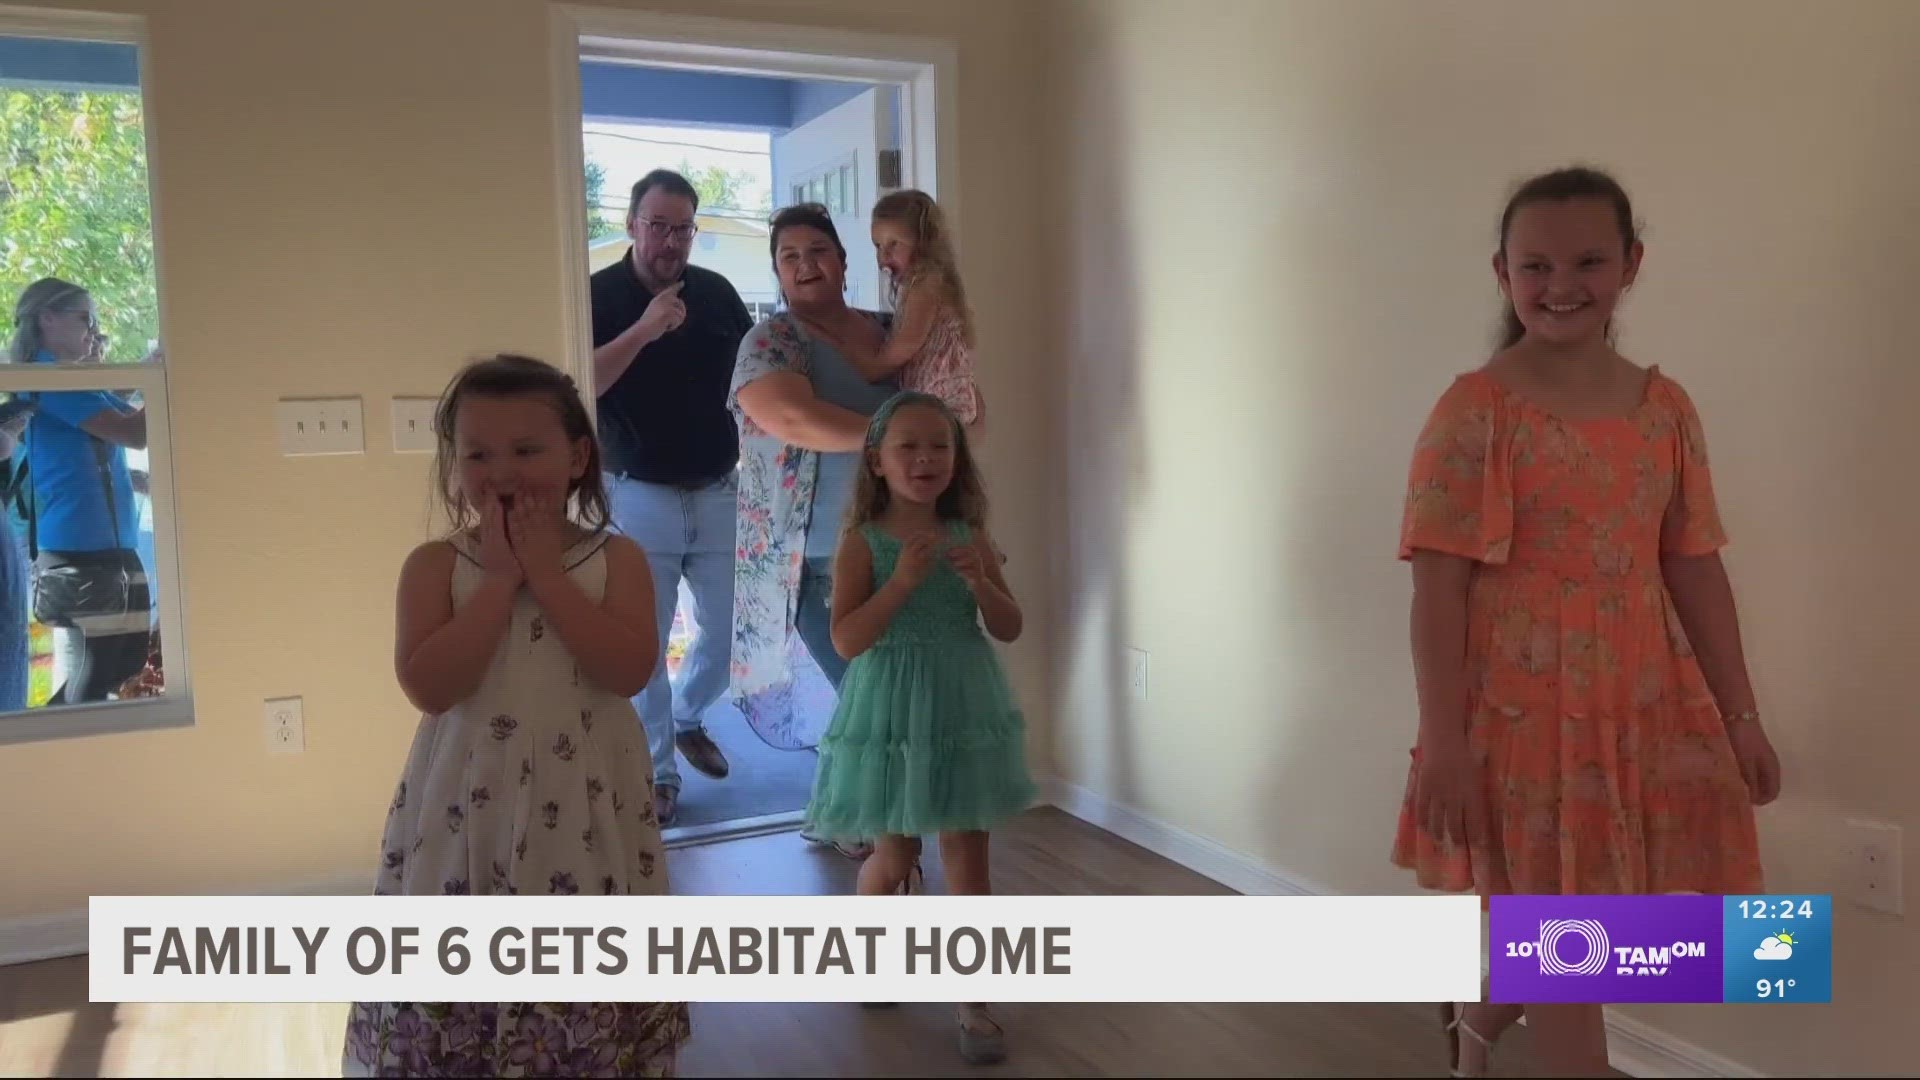 Richard and Rebekah Miller are the parents of four little girls. Their new home came from Habitat for Humanity of Pinellas and West Pasco counties.